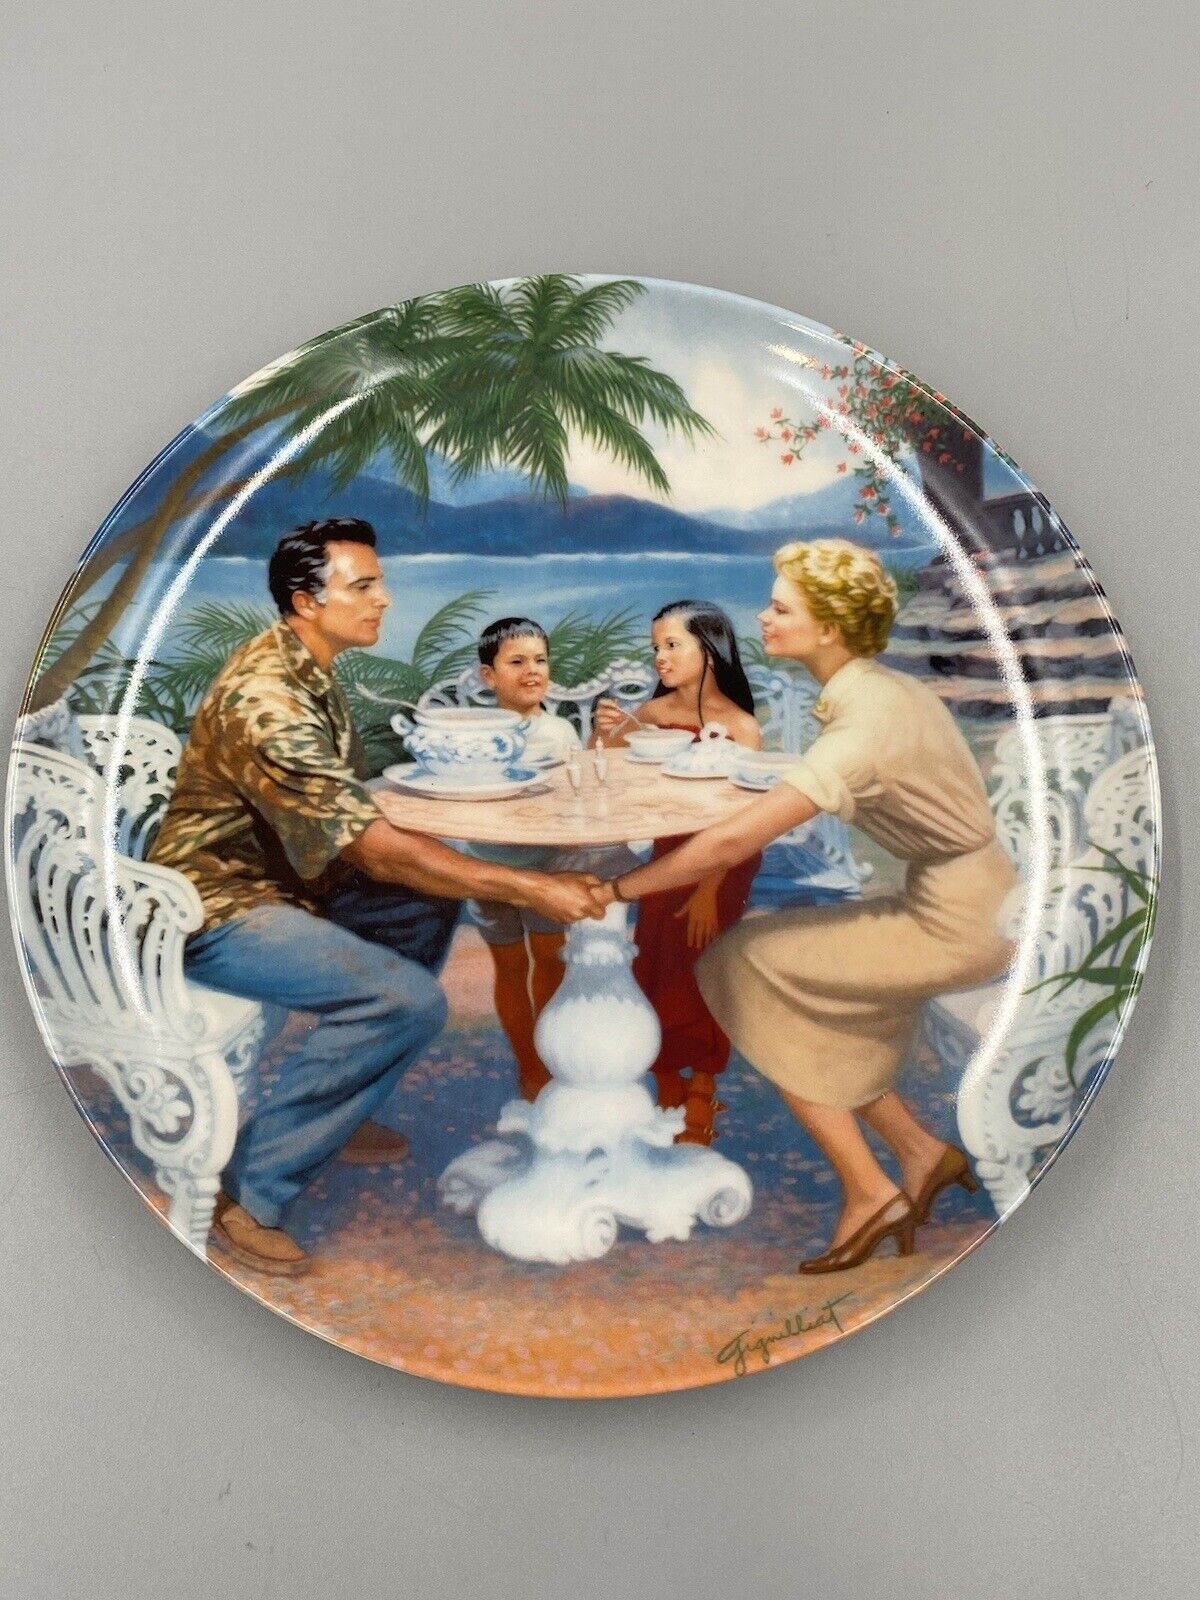 VTG 1987 Knowles South Pacific Collector Plate Dites-Moi, Movie South Pacific